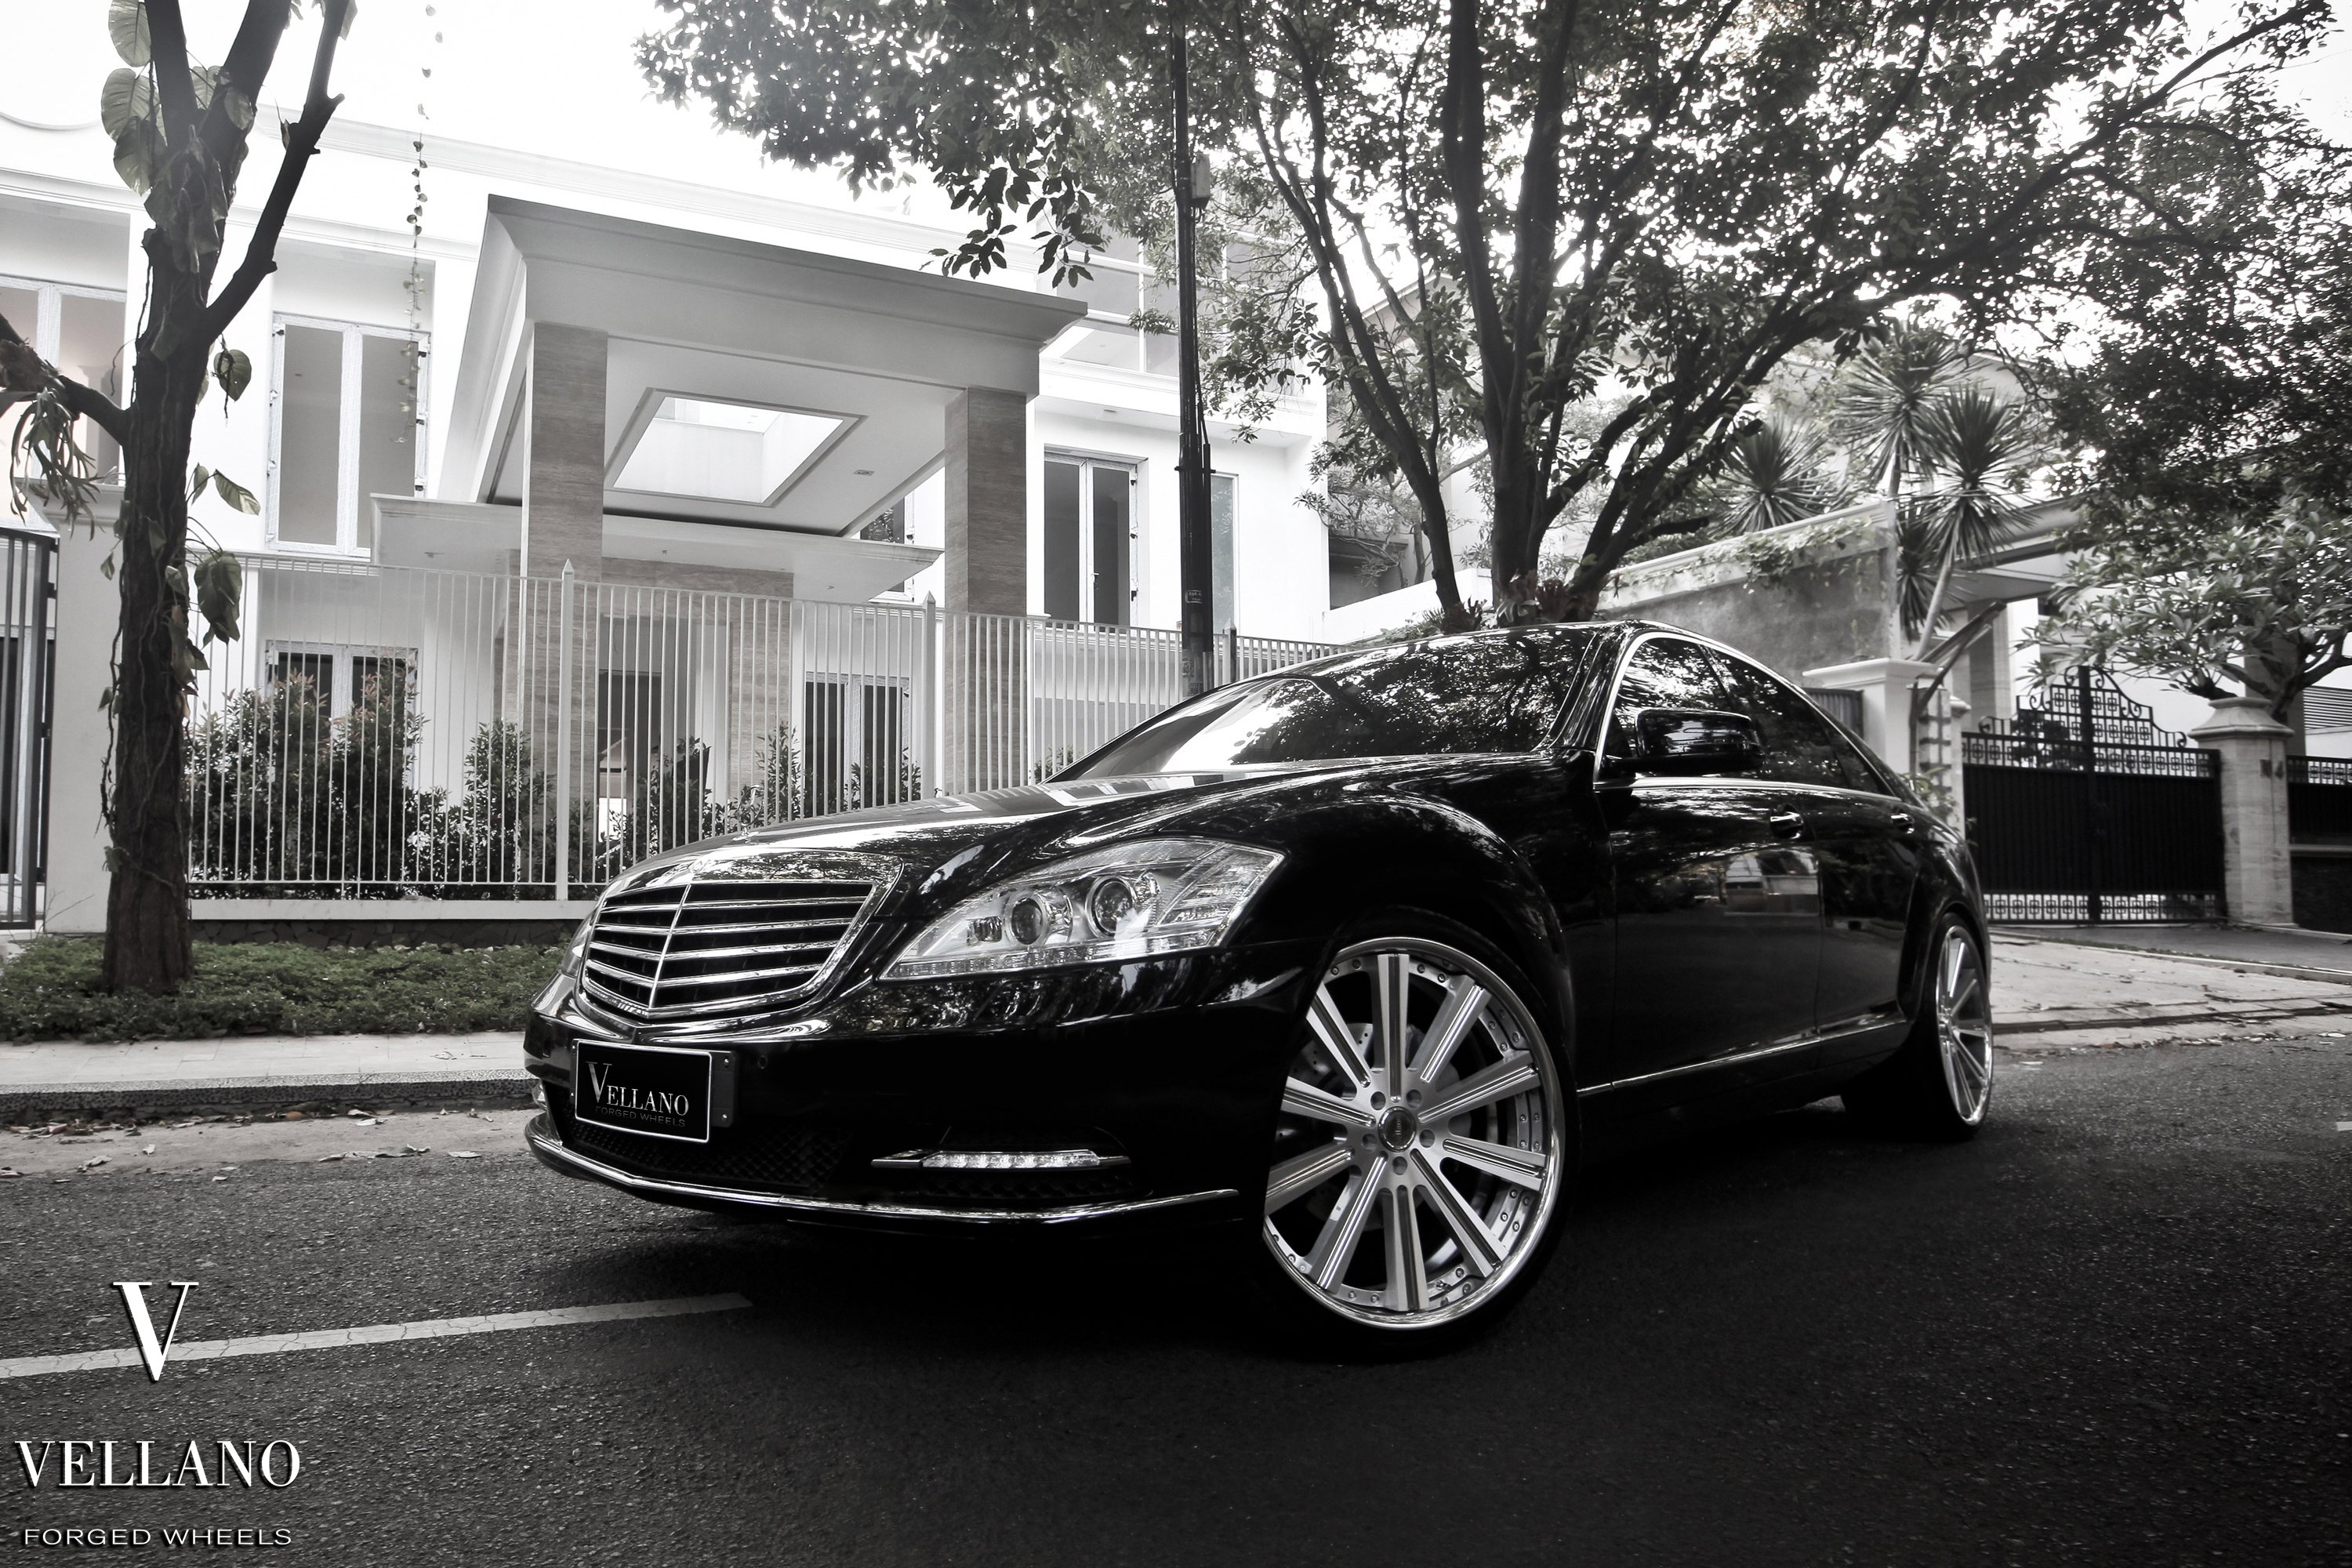 Crystal Clear Headlights on Black Mercedes S-Class - Photo by Vellano